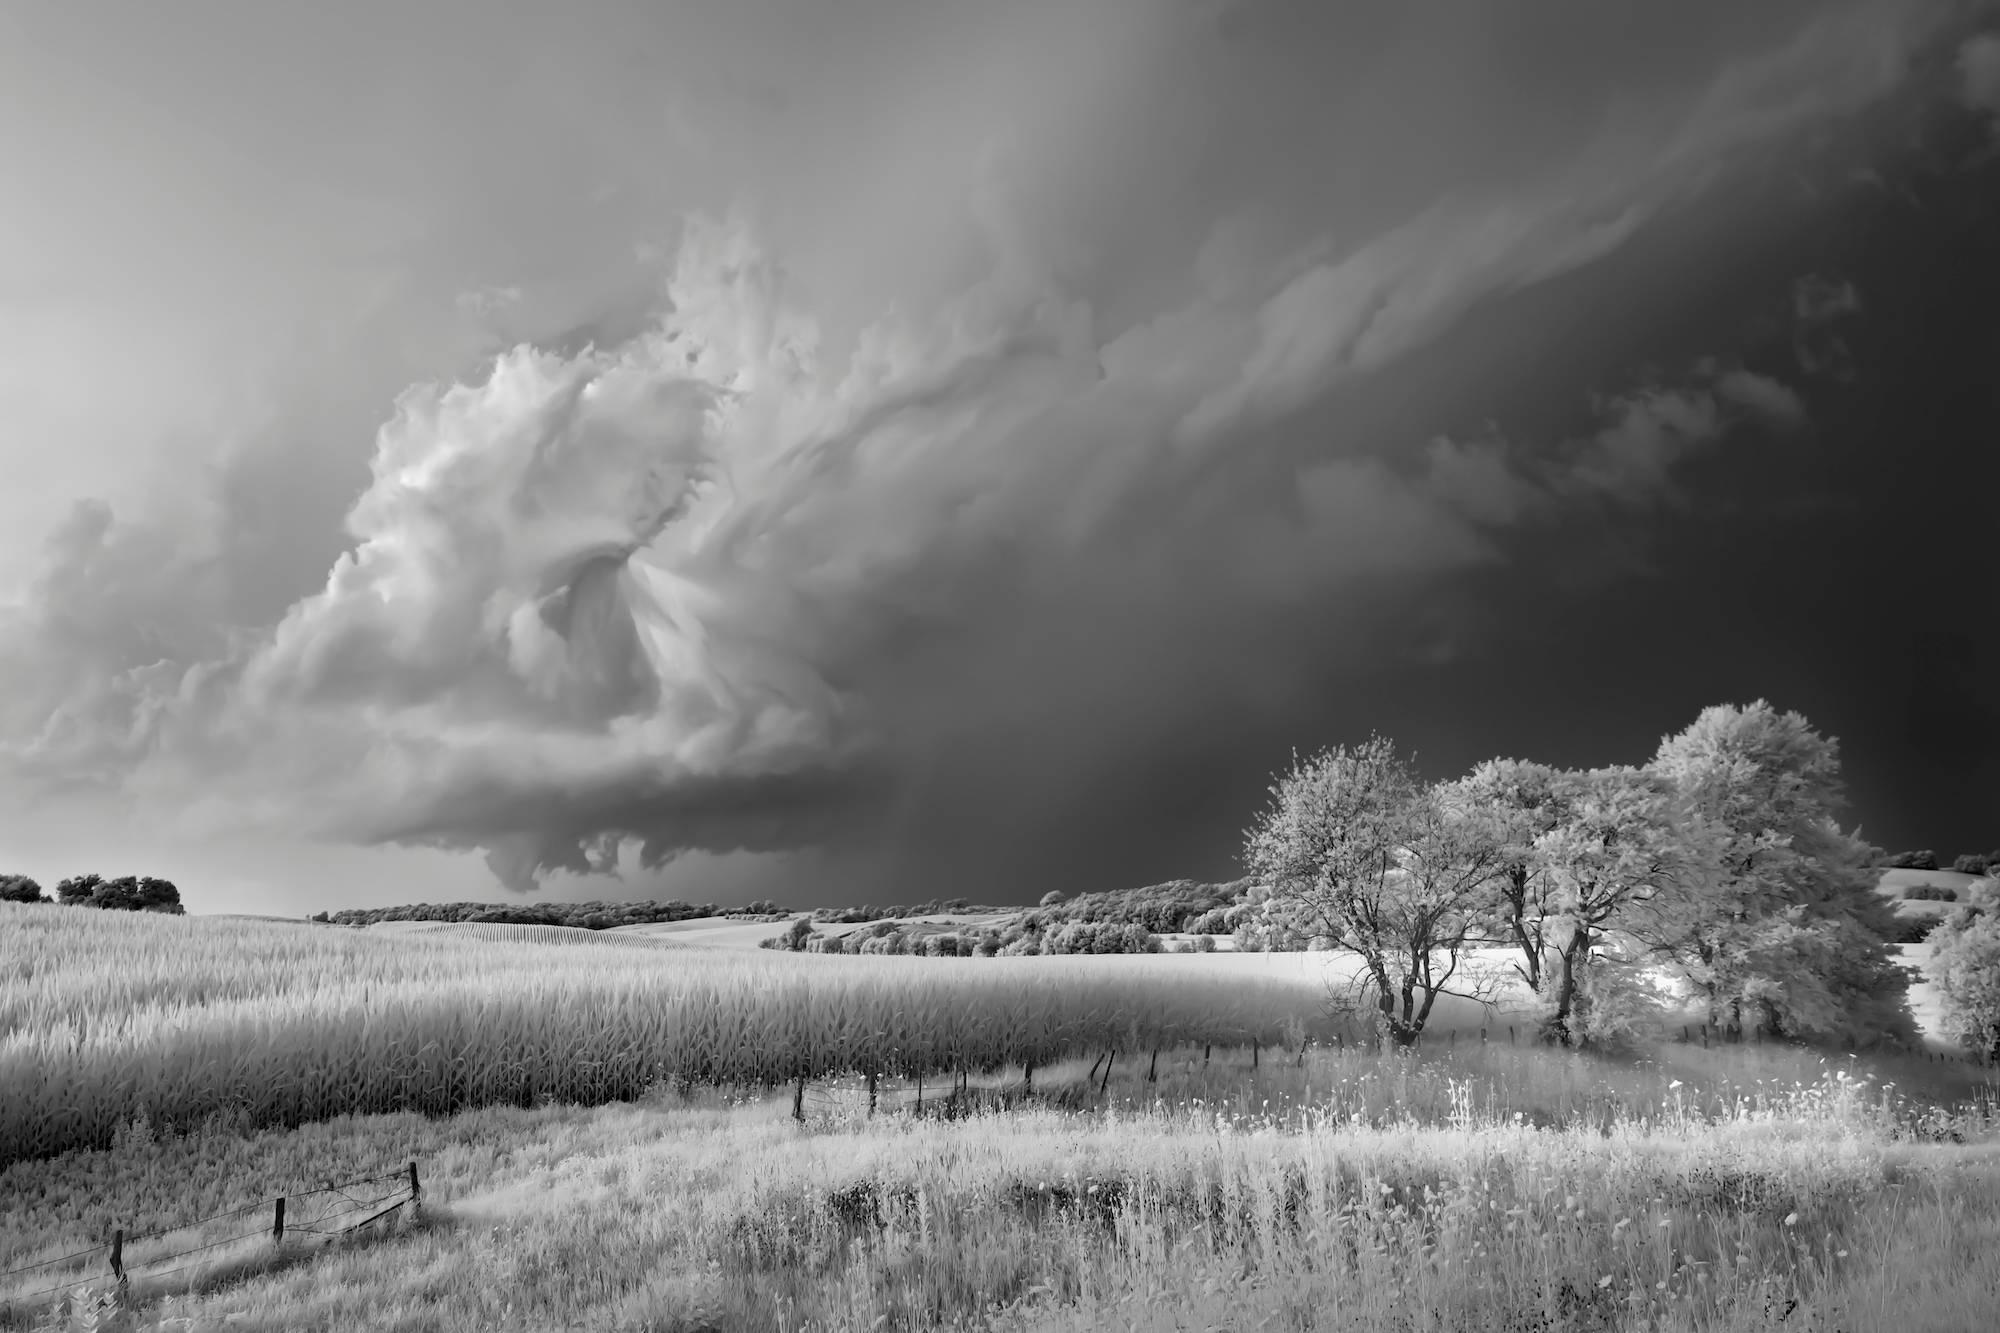 Mitch Dobrowner Landscape Photograph - Storm, Field, and Trees, landscape photograph, archival pigment print, signed 